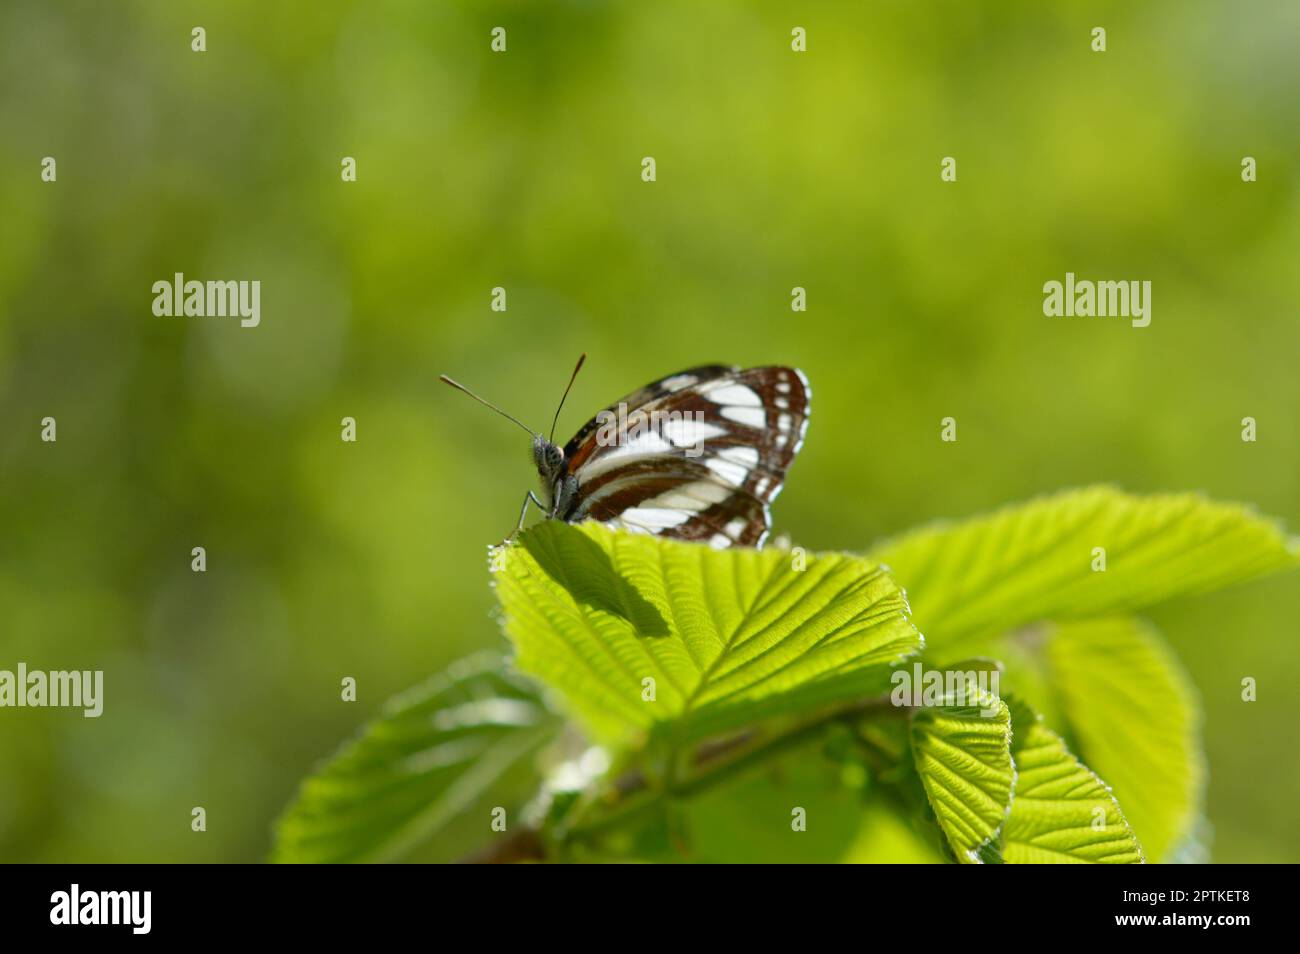 Common sailor, brown and white butterfly on a green leaf macro close up. Stock Photo